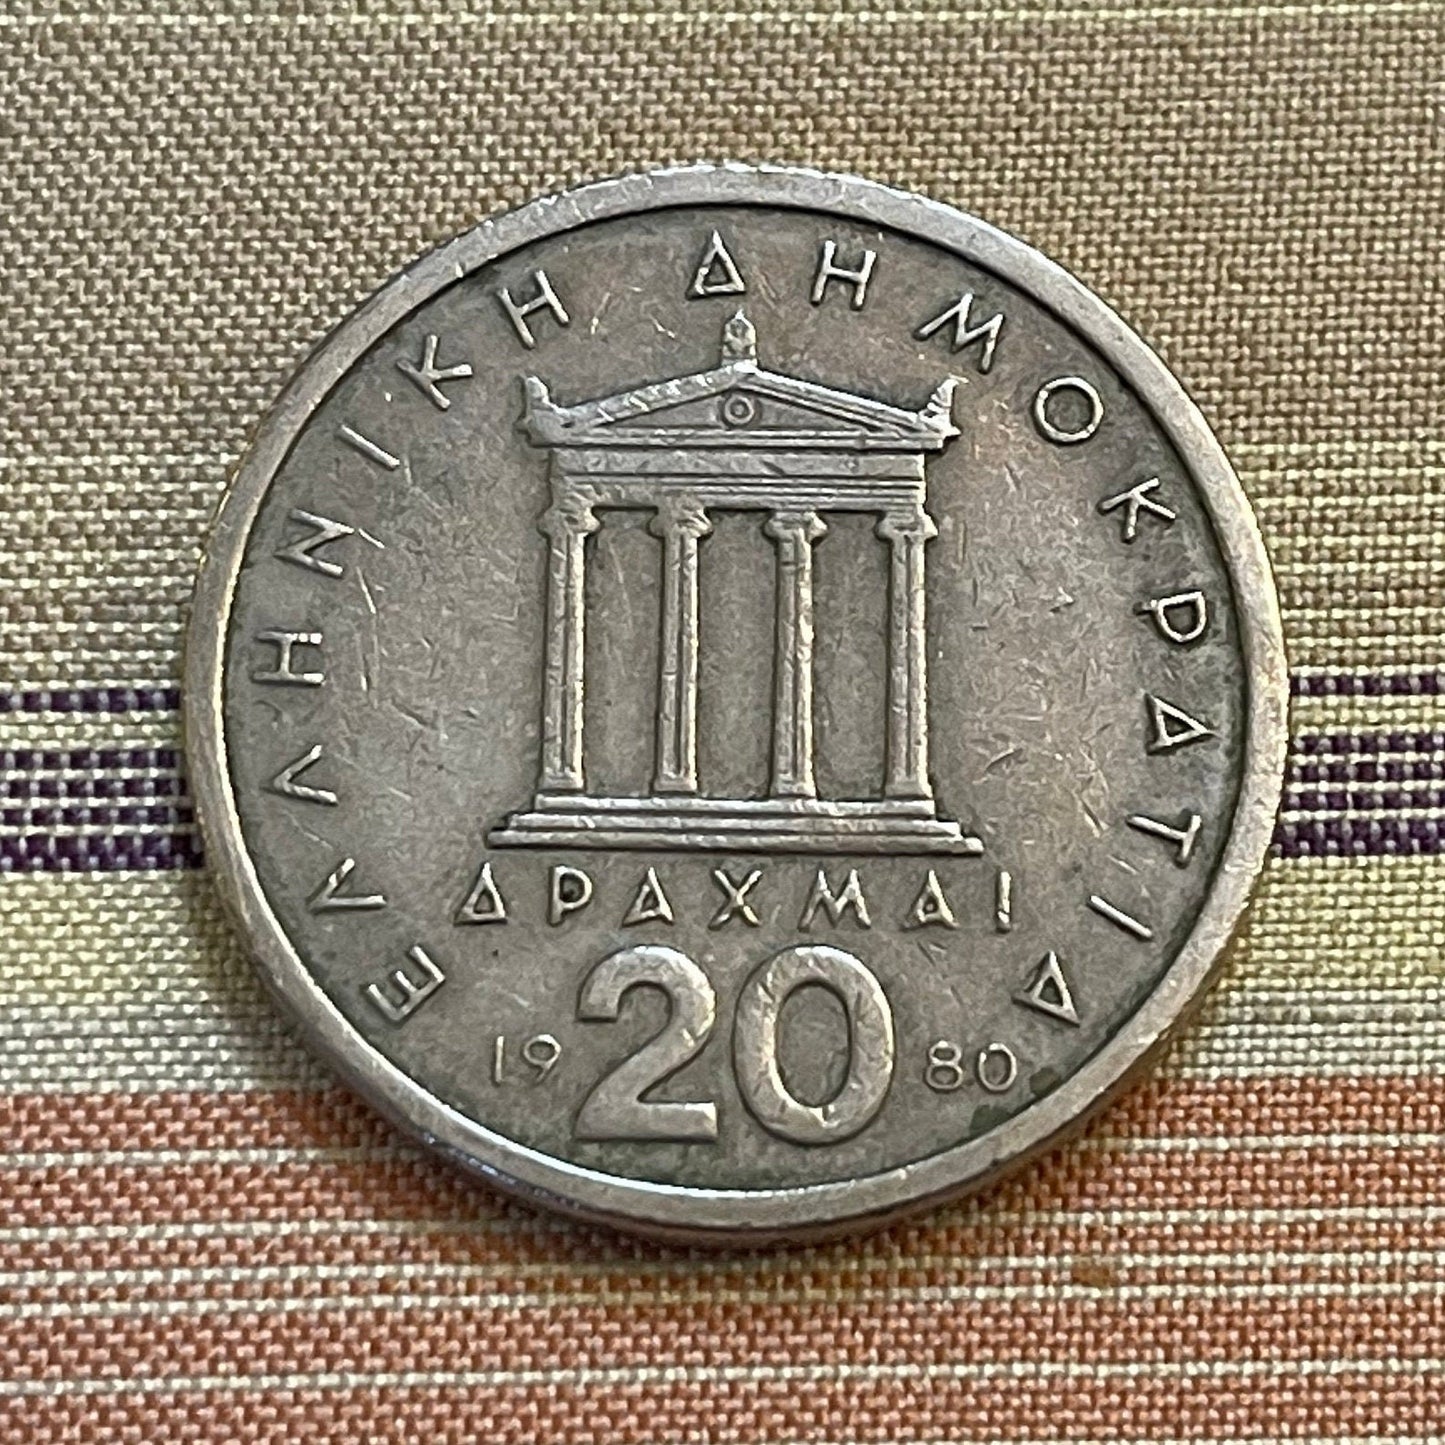 Pericles & Parthenon 20 Drachmai Greece Authentic Coin Money for Jewelry and Craft Making